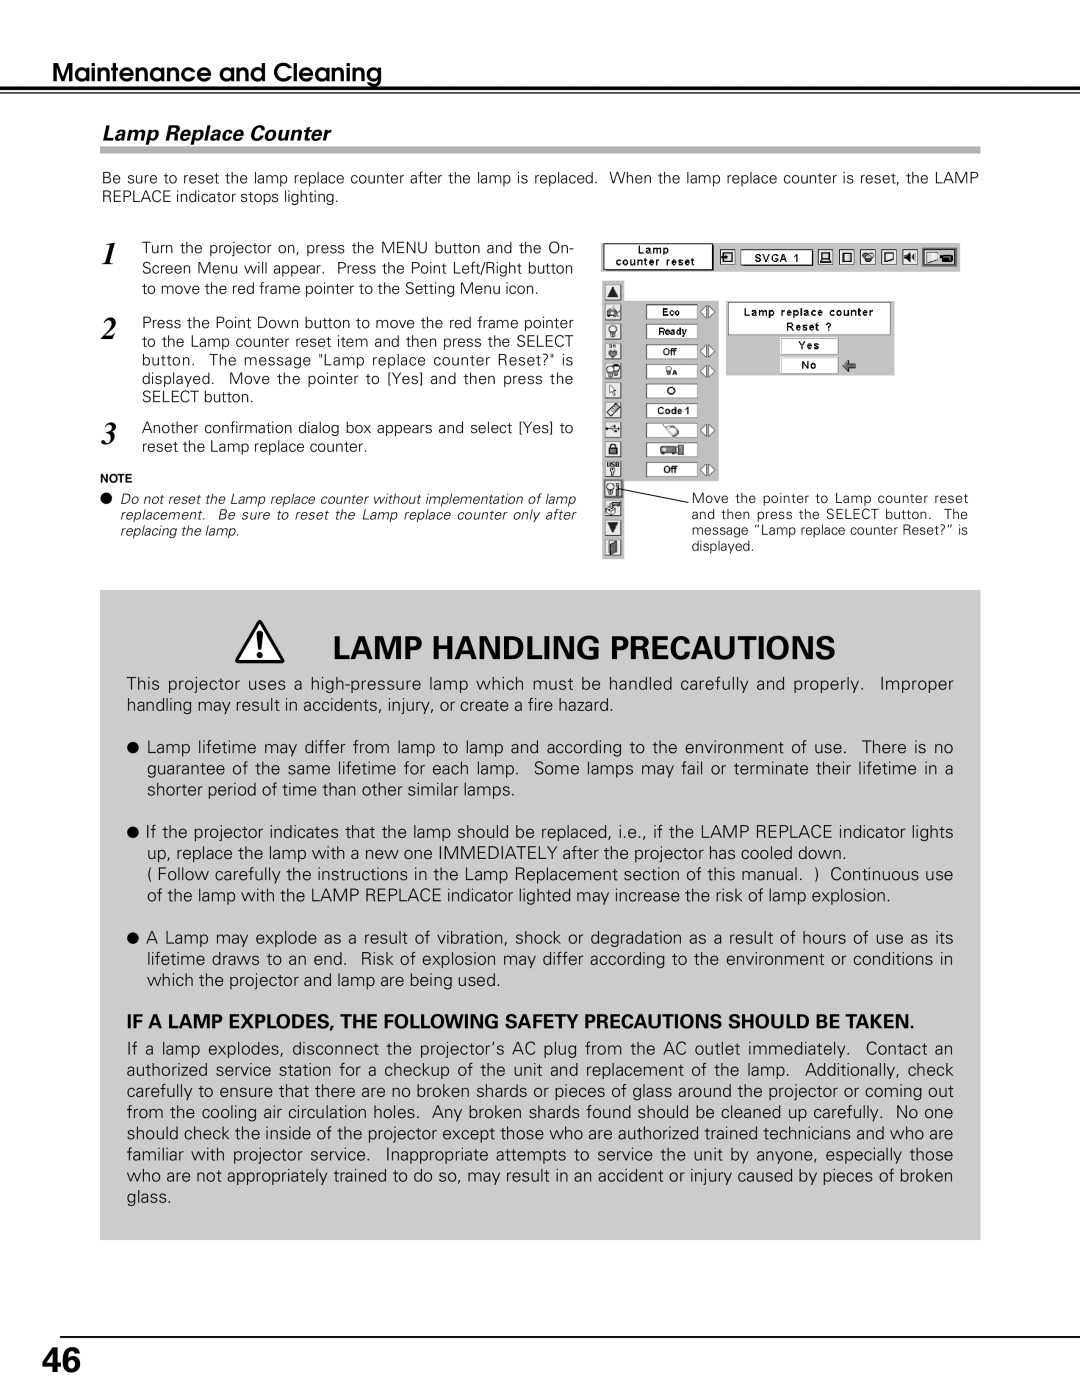 Eiki LC-XE10 instruction manual Lamp Replace Counter, Lamp Handling Precautions, Maintenance and Cleaning 